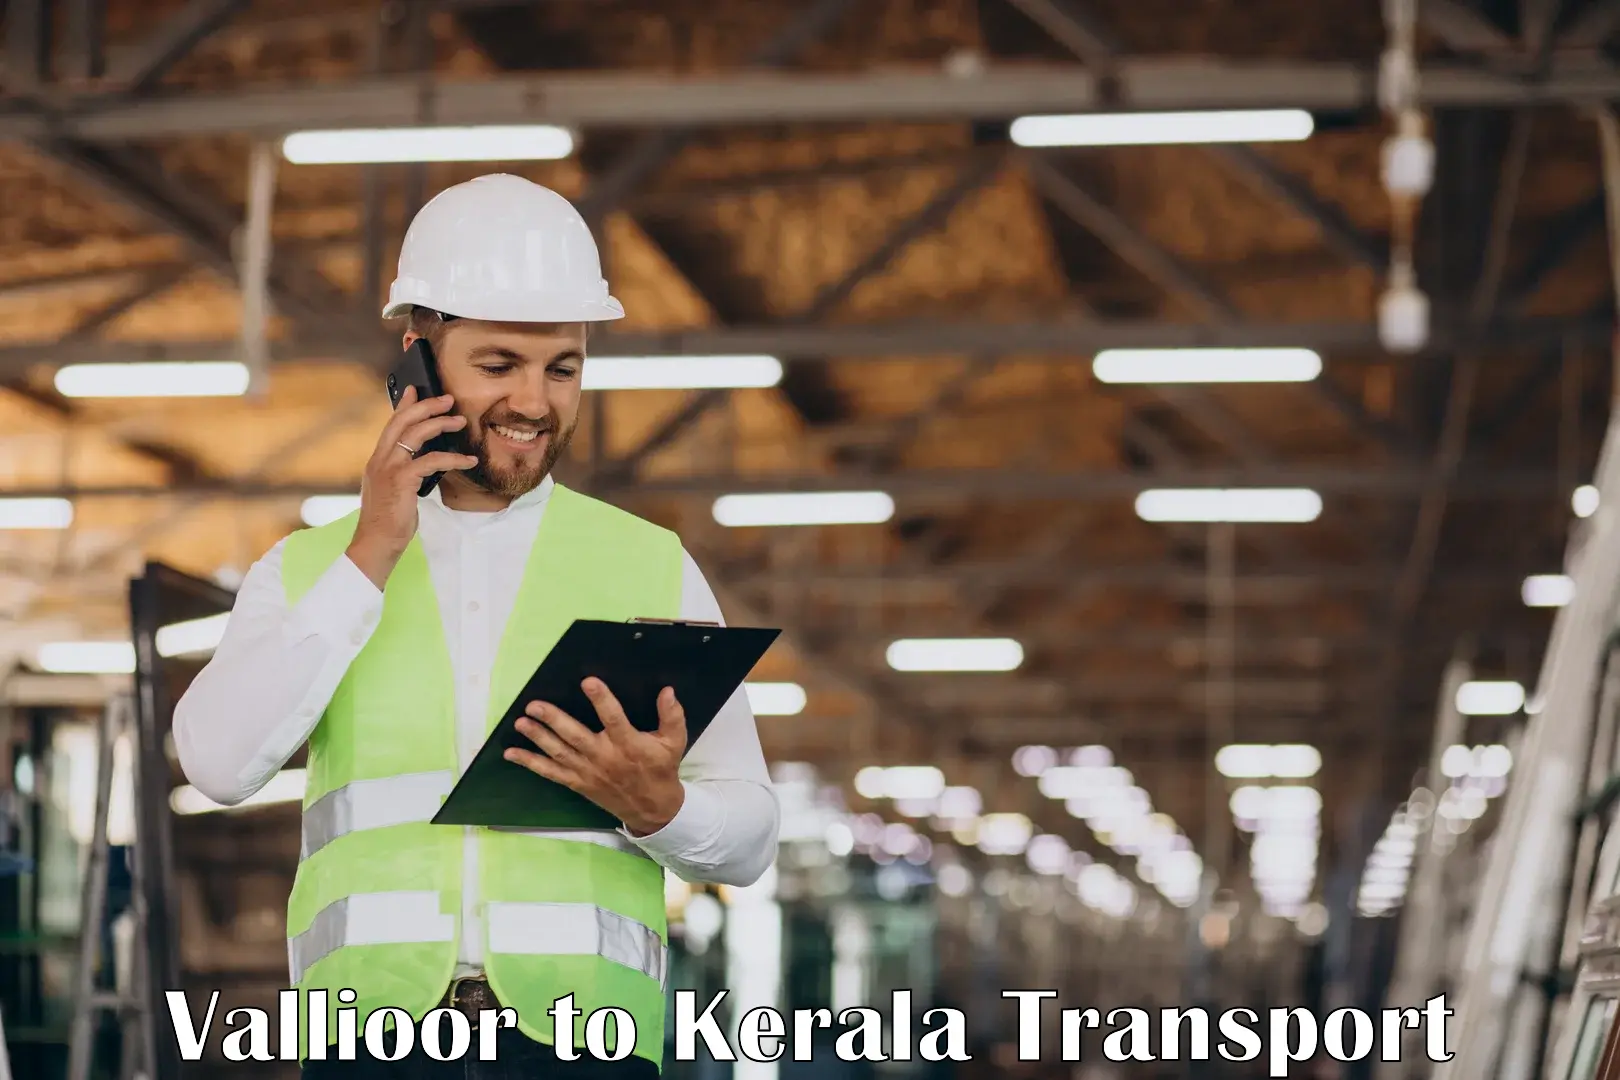 Delivery service Vallioor to Angamaly